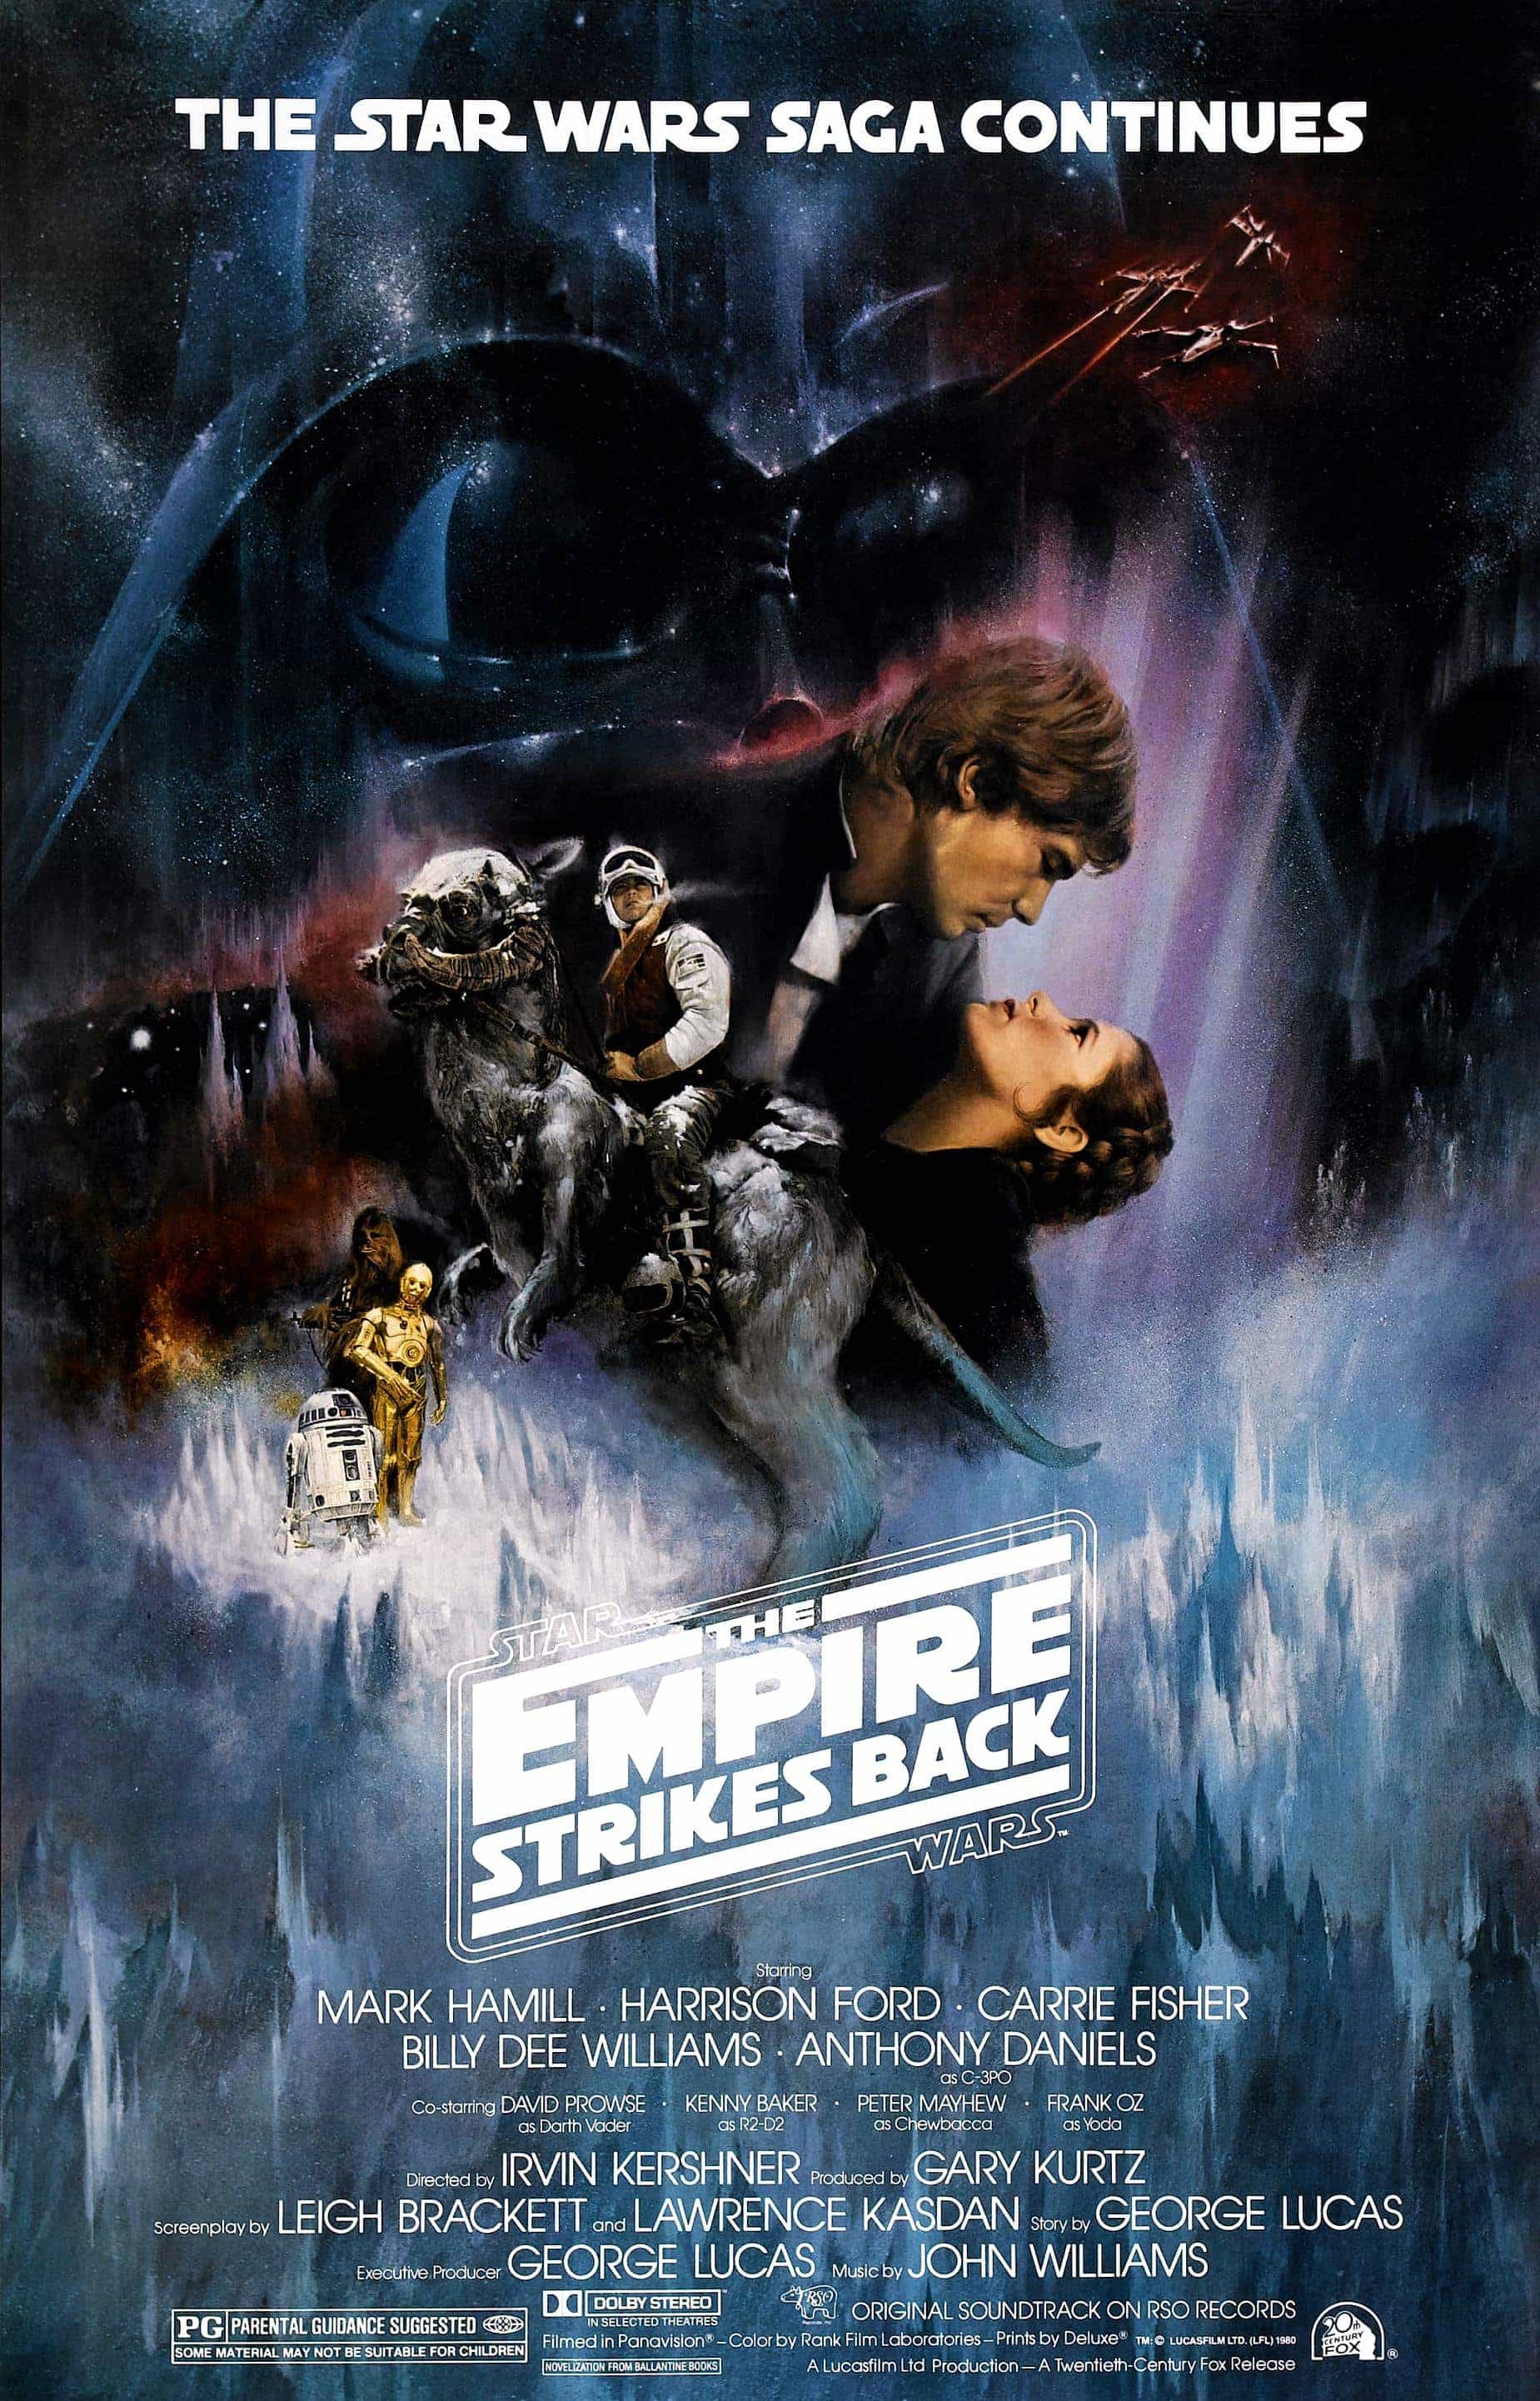 US Box Office Figures 10th - 12th July 2020:  40th anniversary re-release of The Empire Strikes Back is the top movie of the week in a still quiet American box office